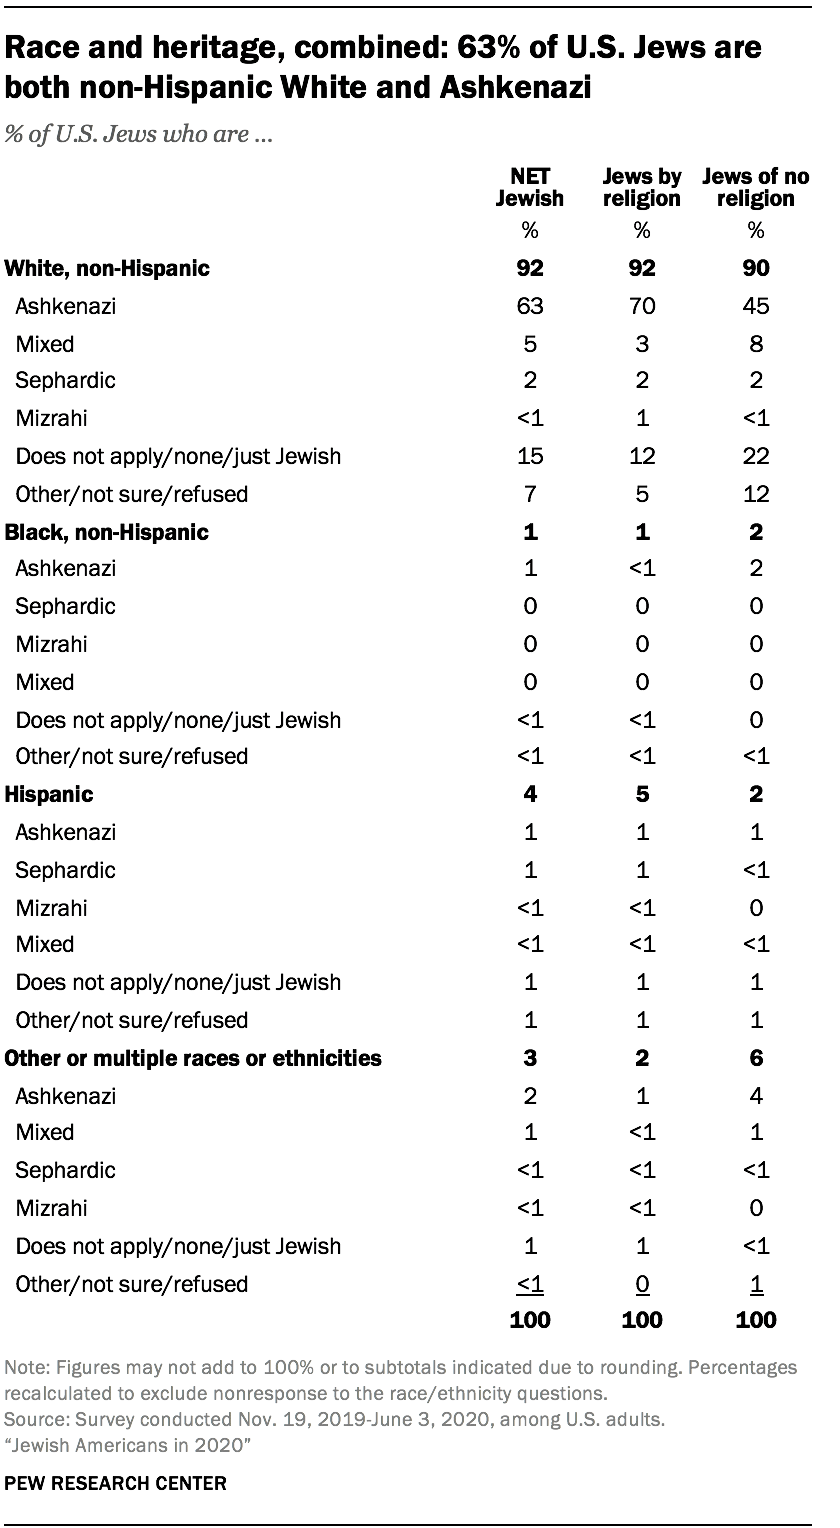 Race and heritage, combined: 63% of U.S. Jews are both non-Hispanic White and Ashkenazi